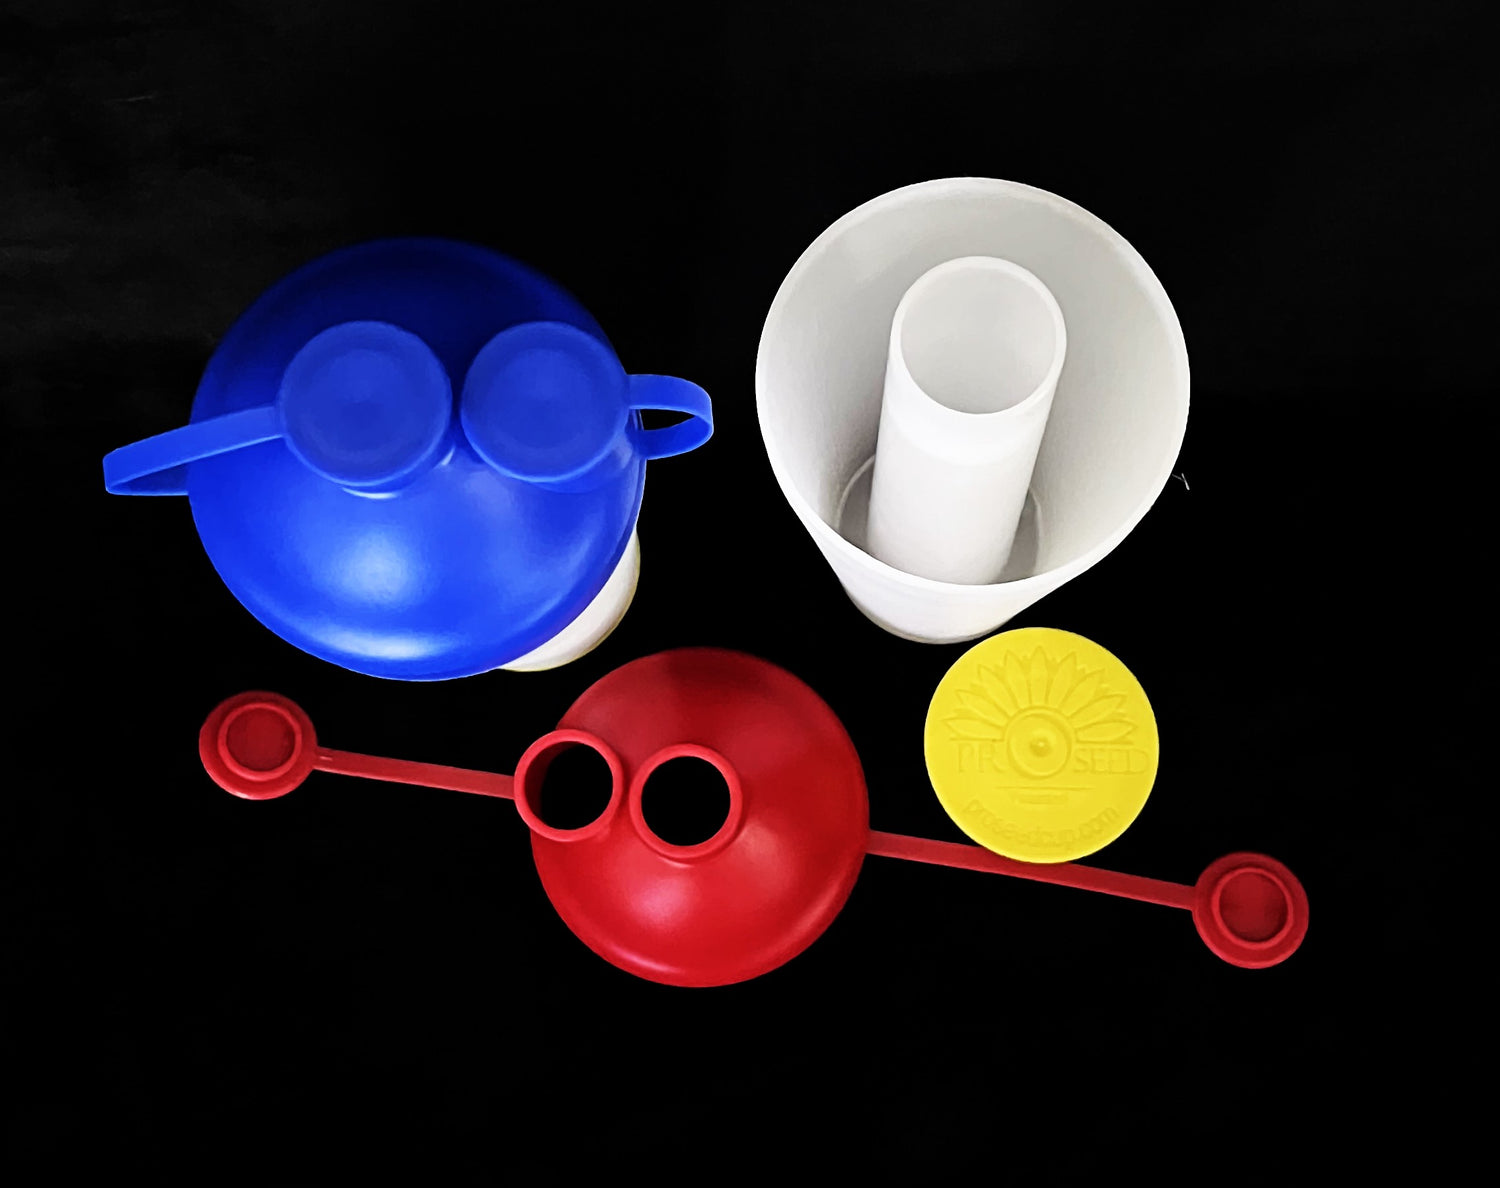 Several pieces of a ProSeed cup on a black background